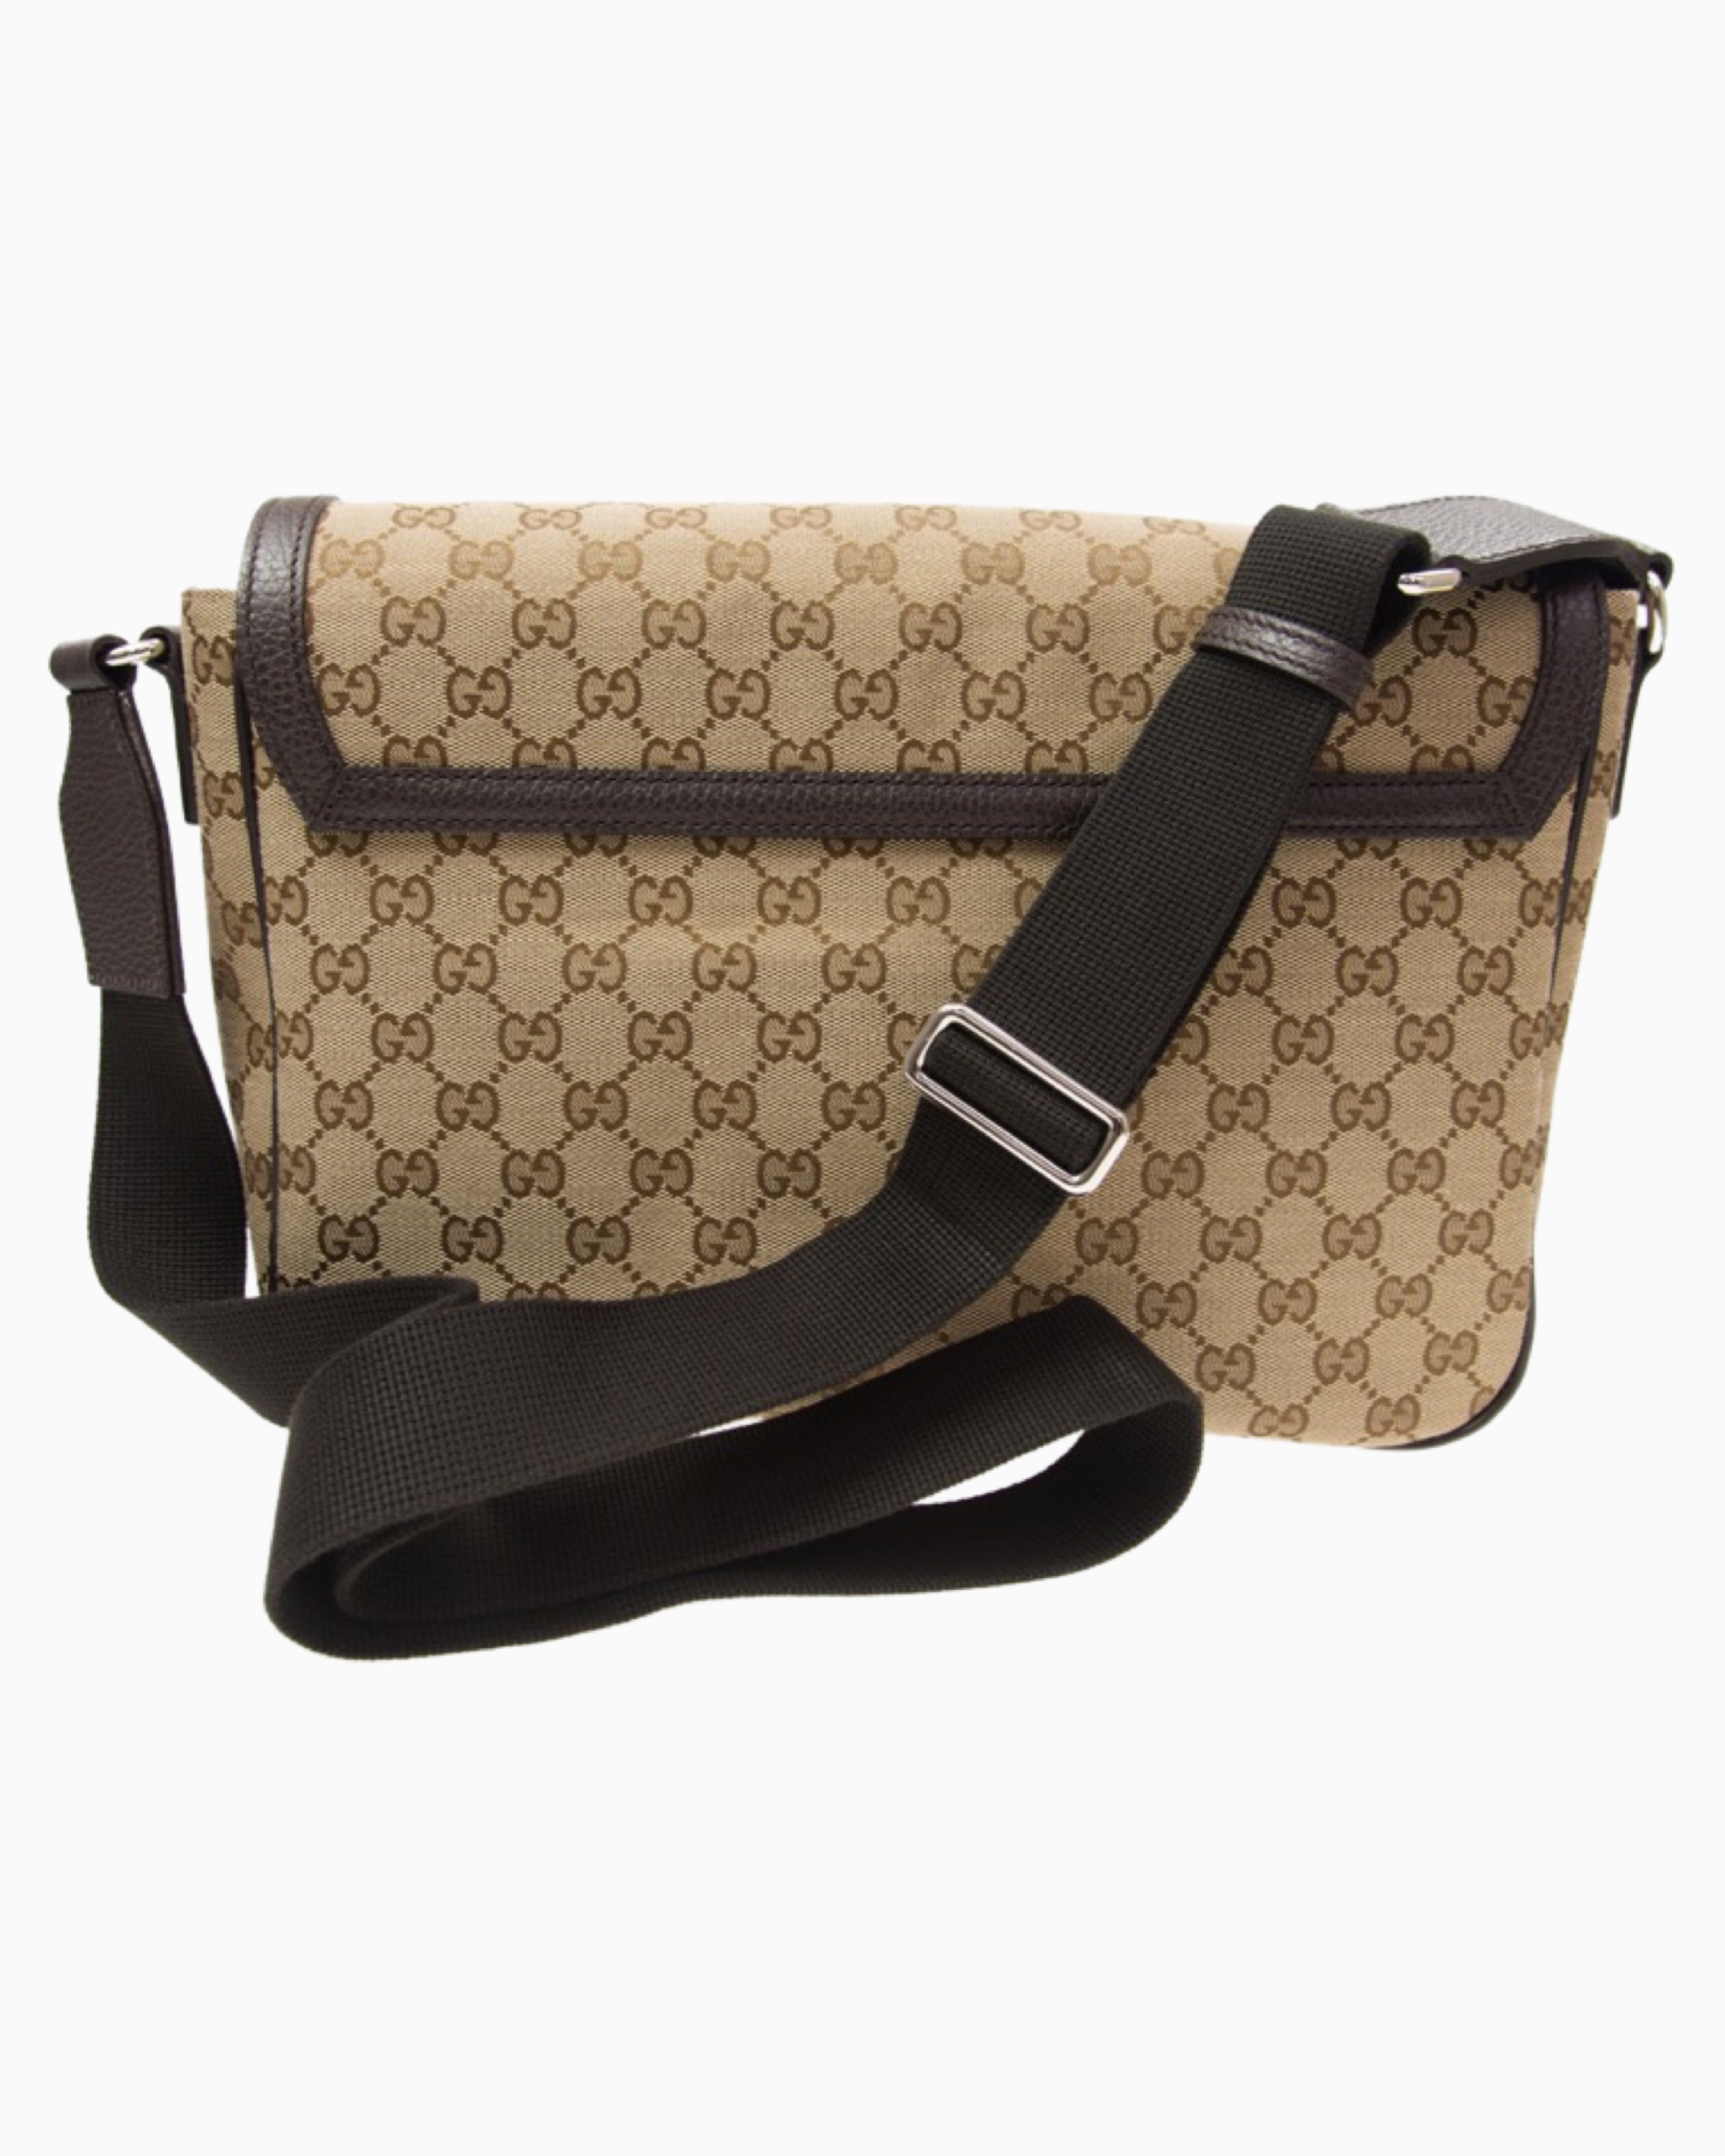 New Gucci Beige Brown Canvas Leather GG Supreme Messenger